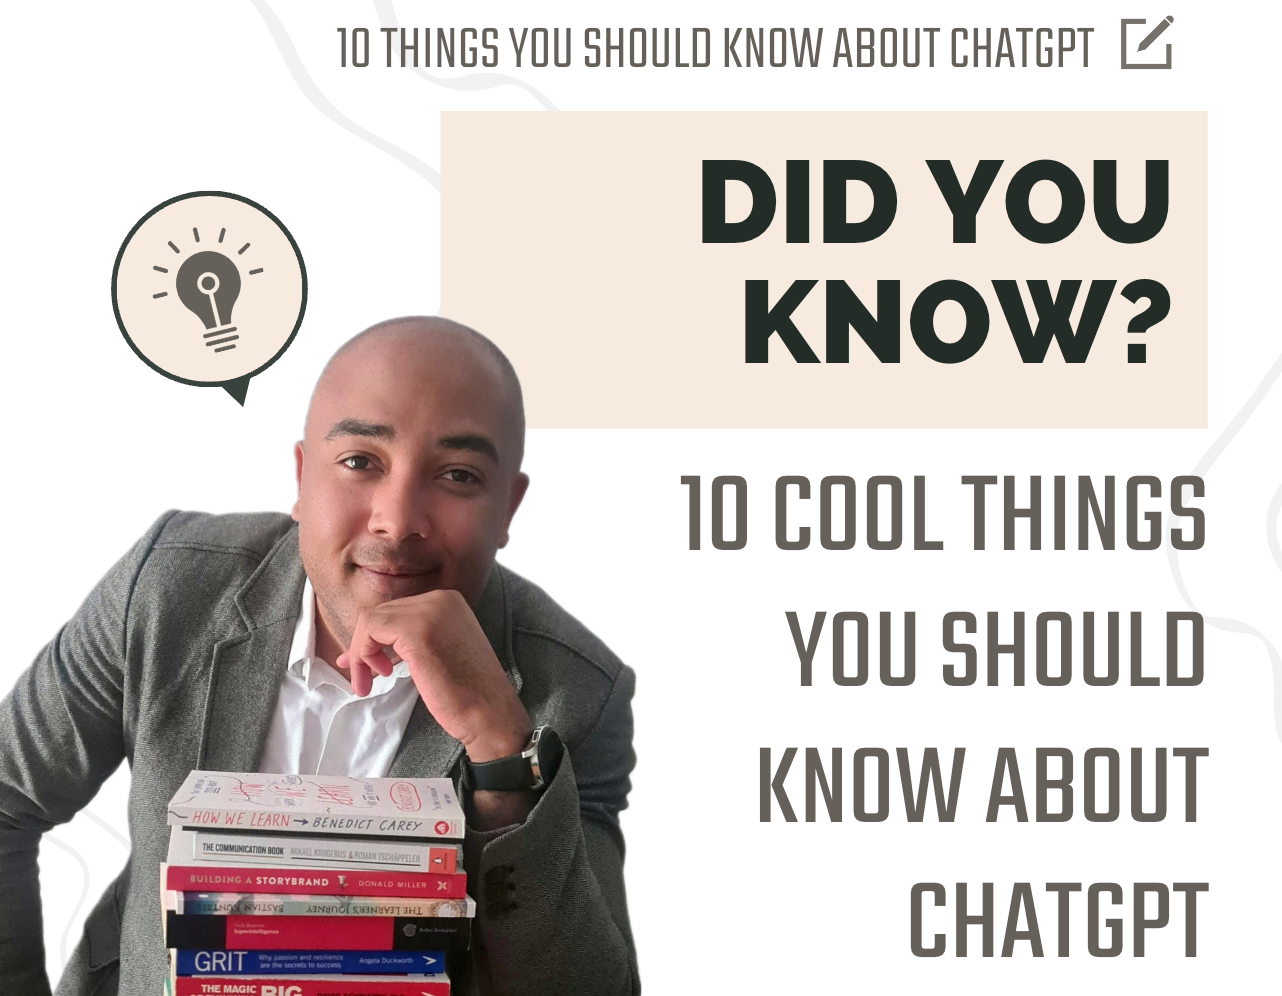 10 cool things you should know about ChatGPT | by Jair Ribeiro | Towards AI